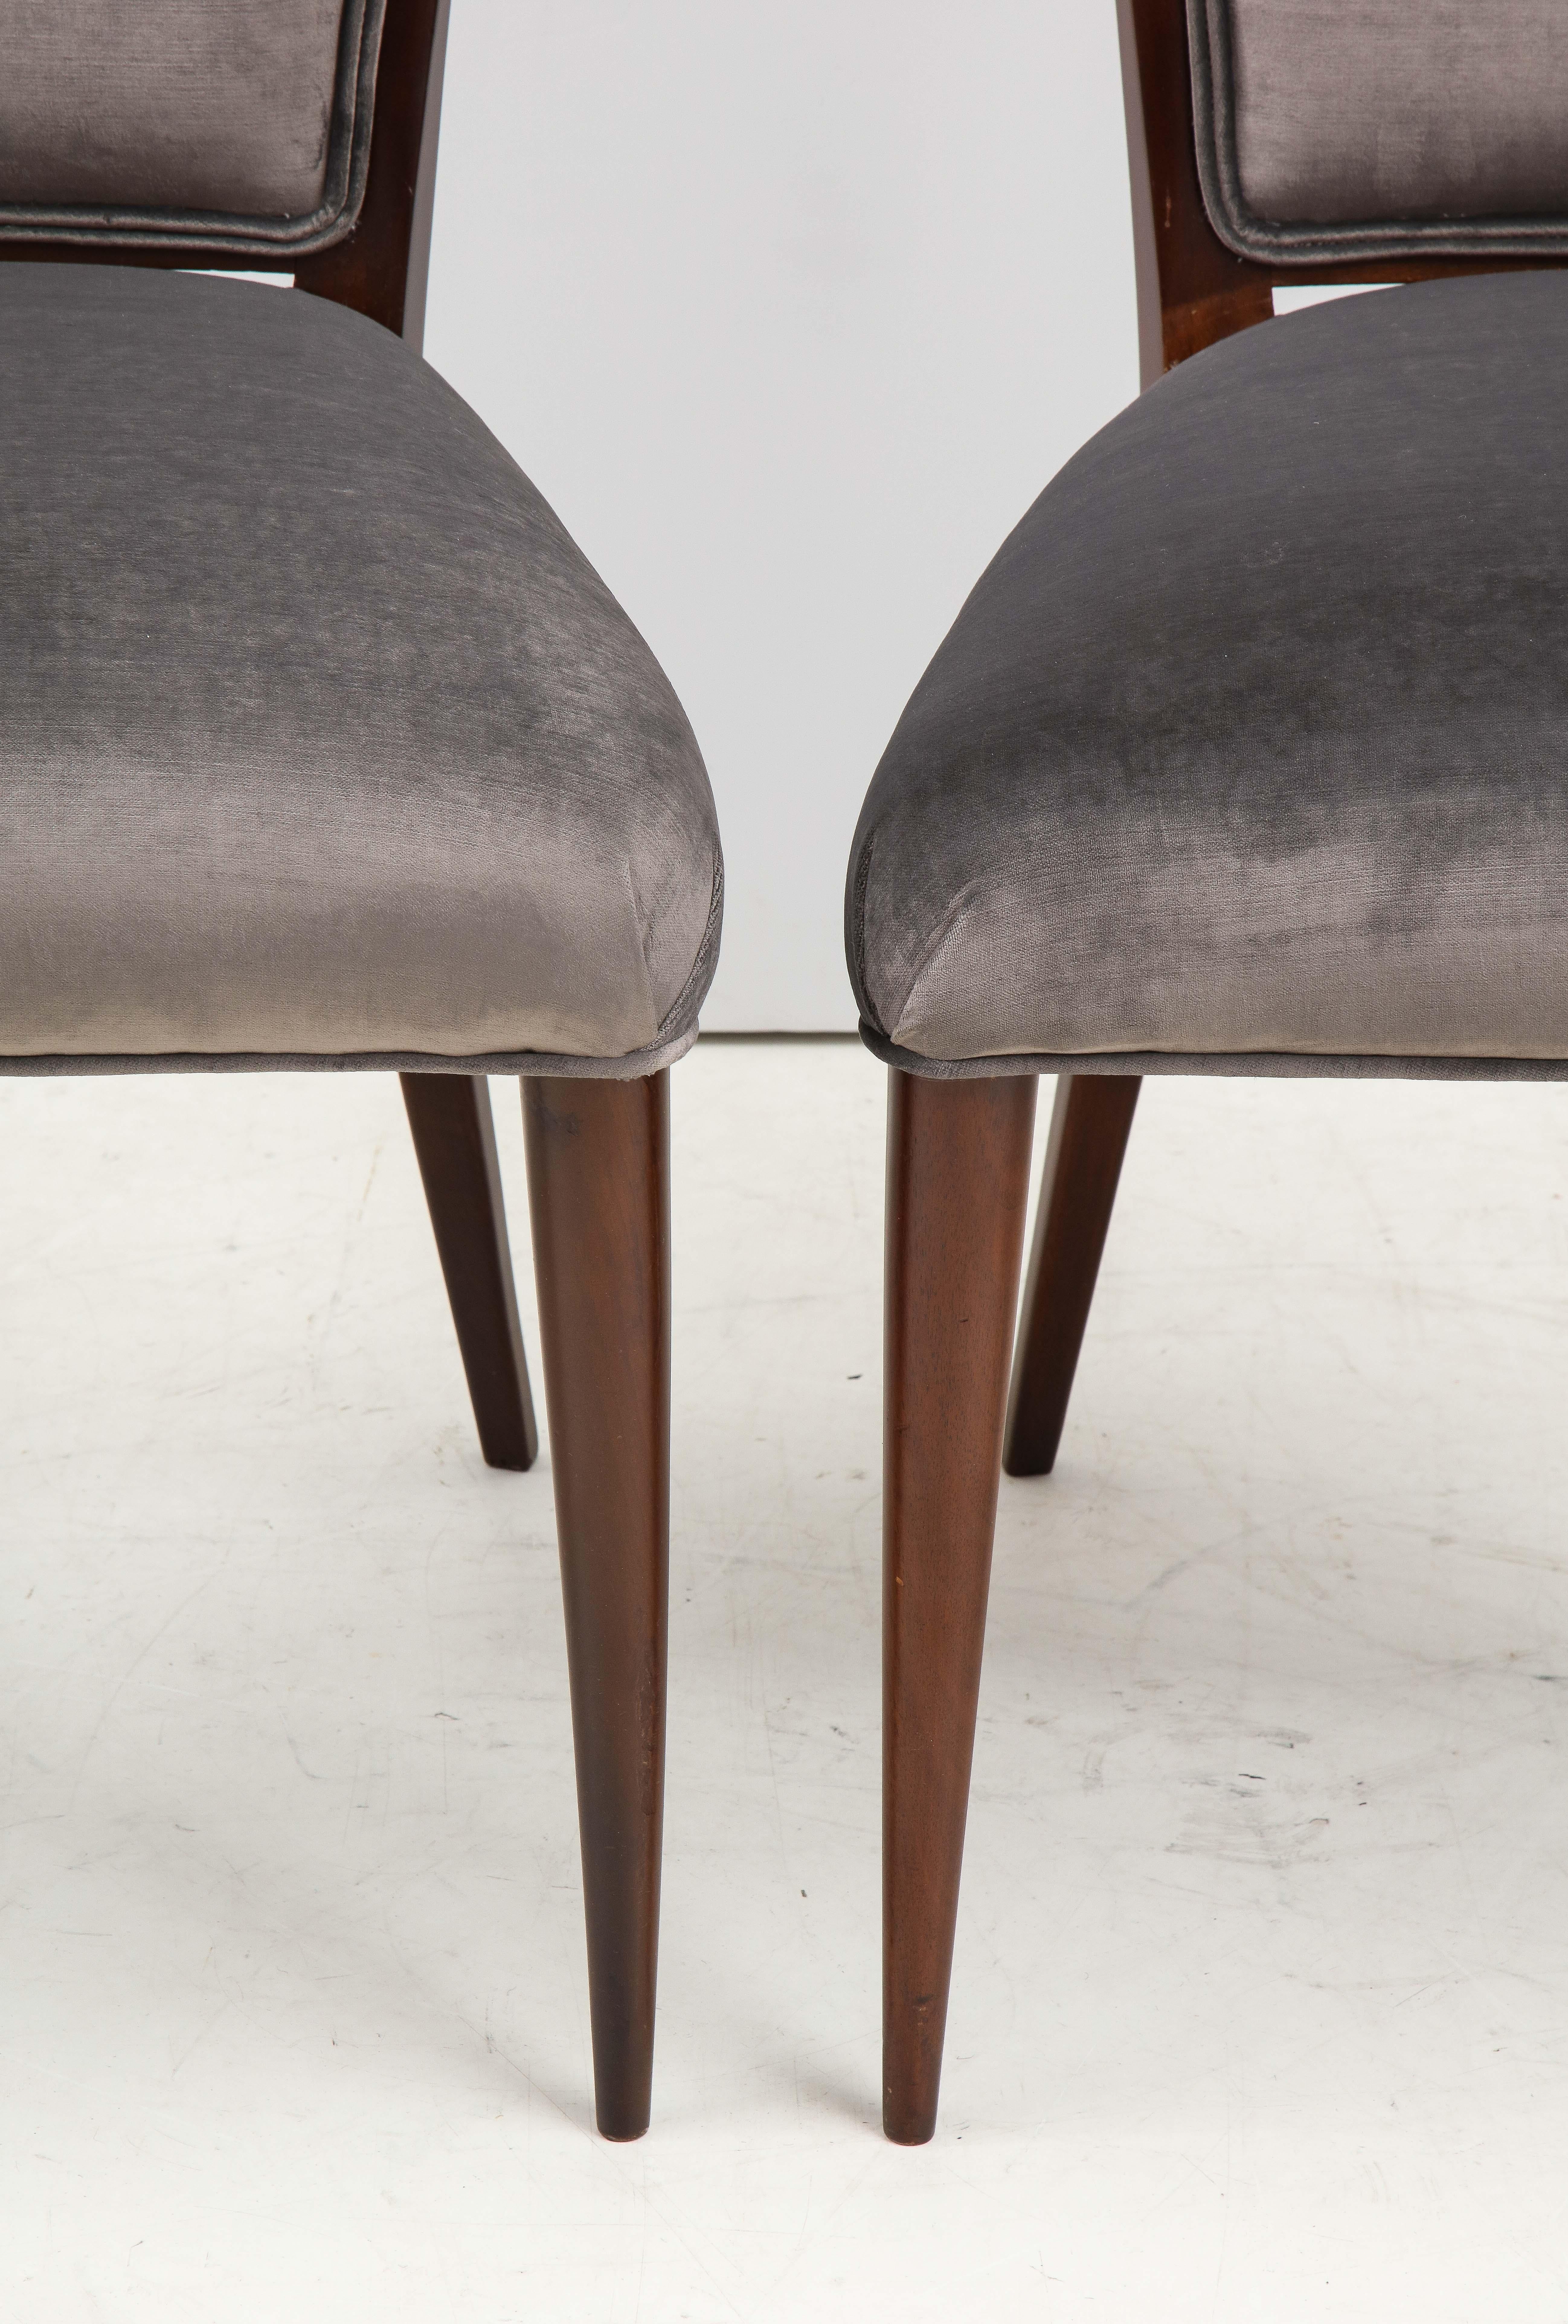 1960s Modernist Italian Walnut Dining Chairs In Good Condition For Sale In New York, NY